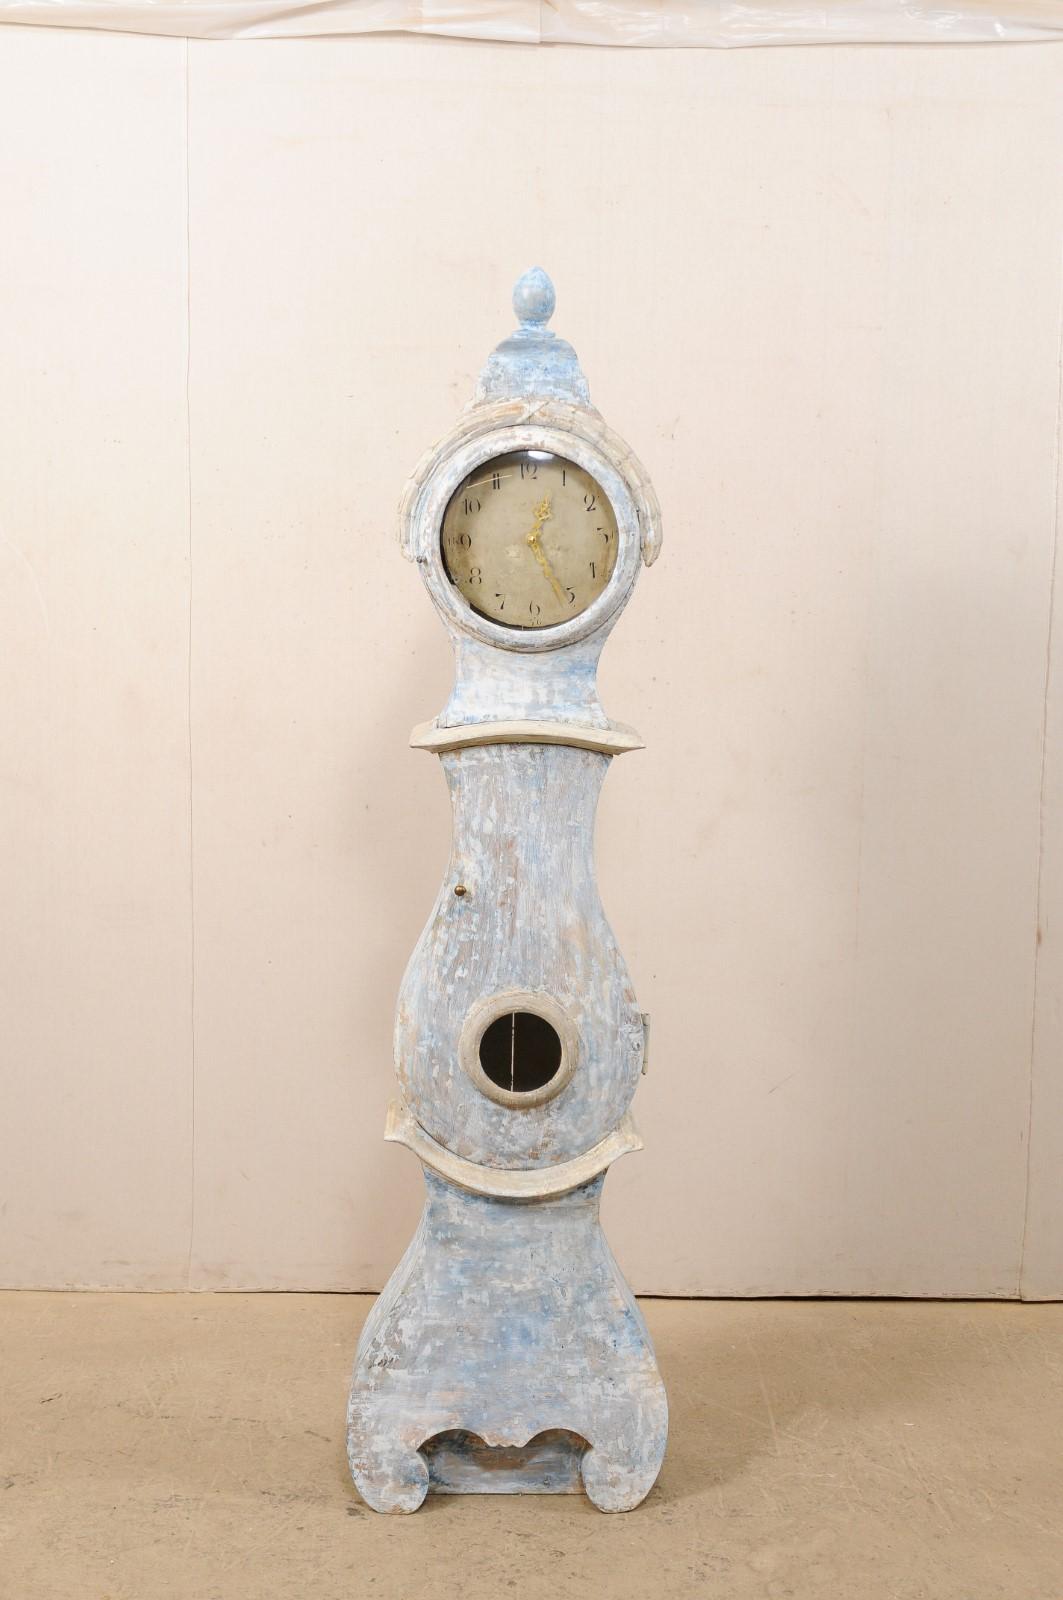 A Swedish long-case carved and painted wood floor clock from the 19th century, with new quartz movement. This antique floor clock from Sweden, has an exaggerated bonnet topped with egg-shaped finial. The clock has a distinctly curvy rain-drop shaped